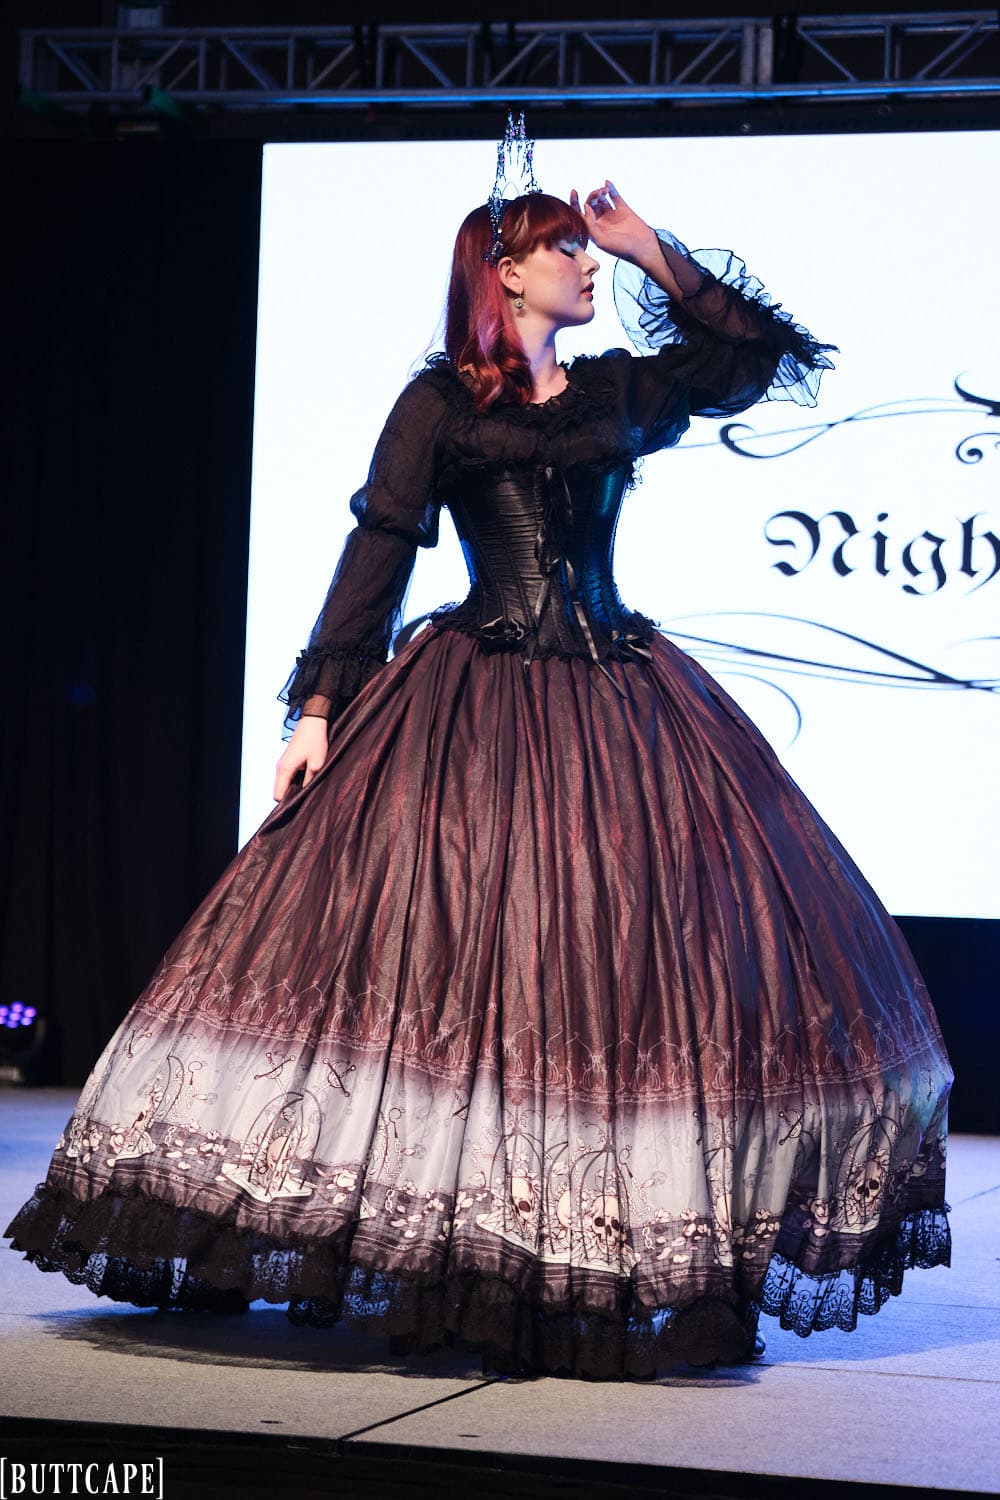 gothic model wearing floor length gown posing with arm up.